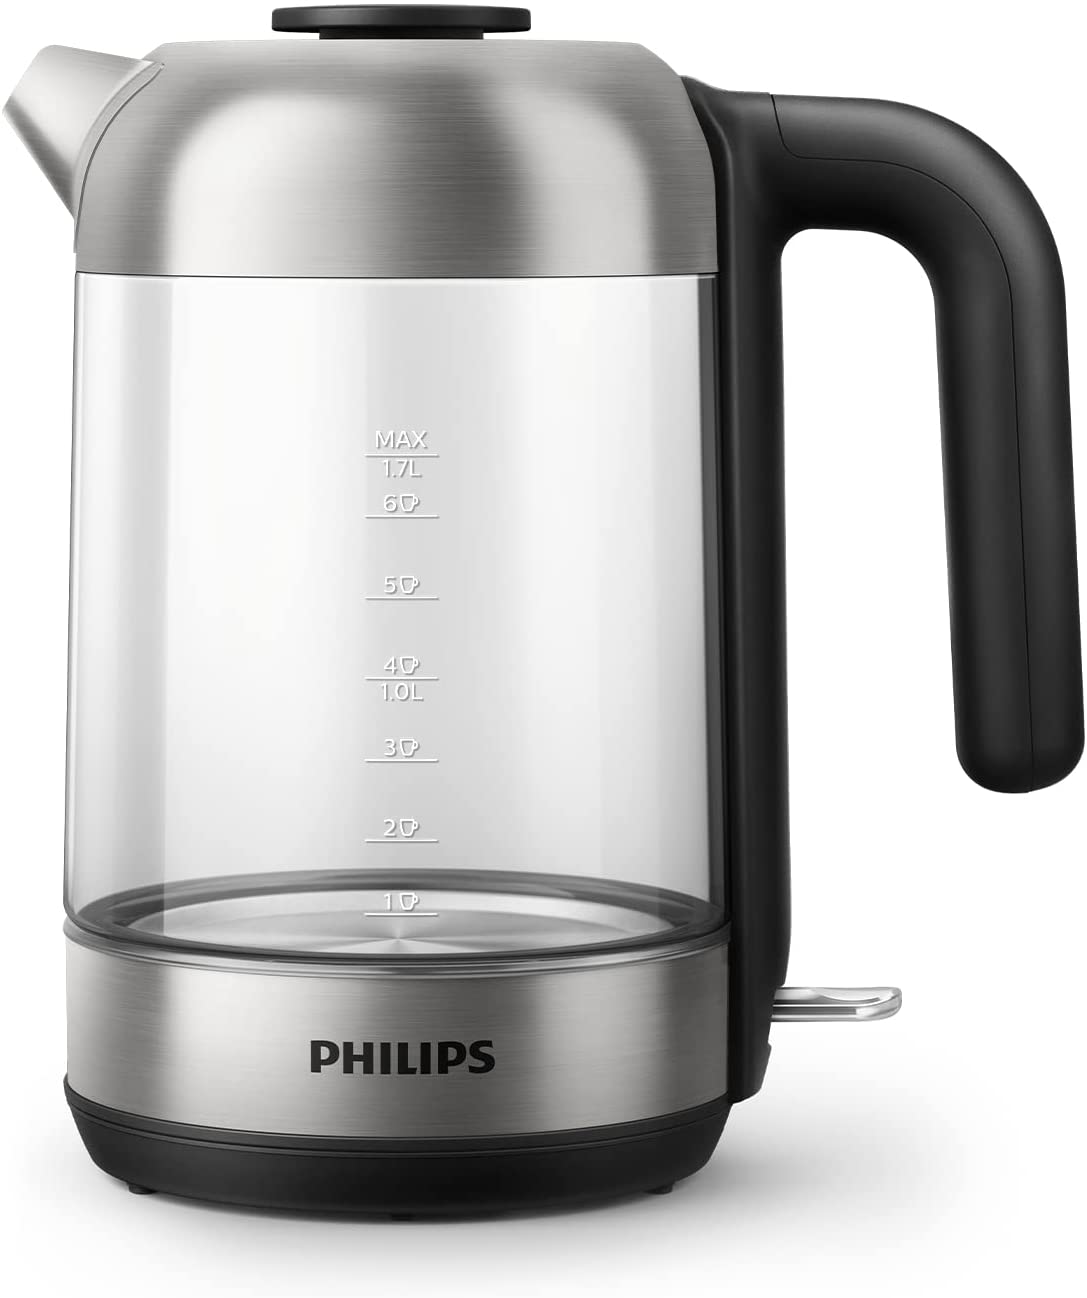 Philips Domestic Appliances Philips HD9339/80 Glass Kettle, 1.7 Litres, LED Lighting, Dry Run Protection, Removable Micro Strainer Filter, 2200 W